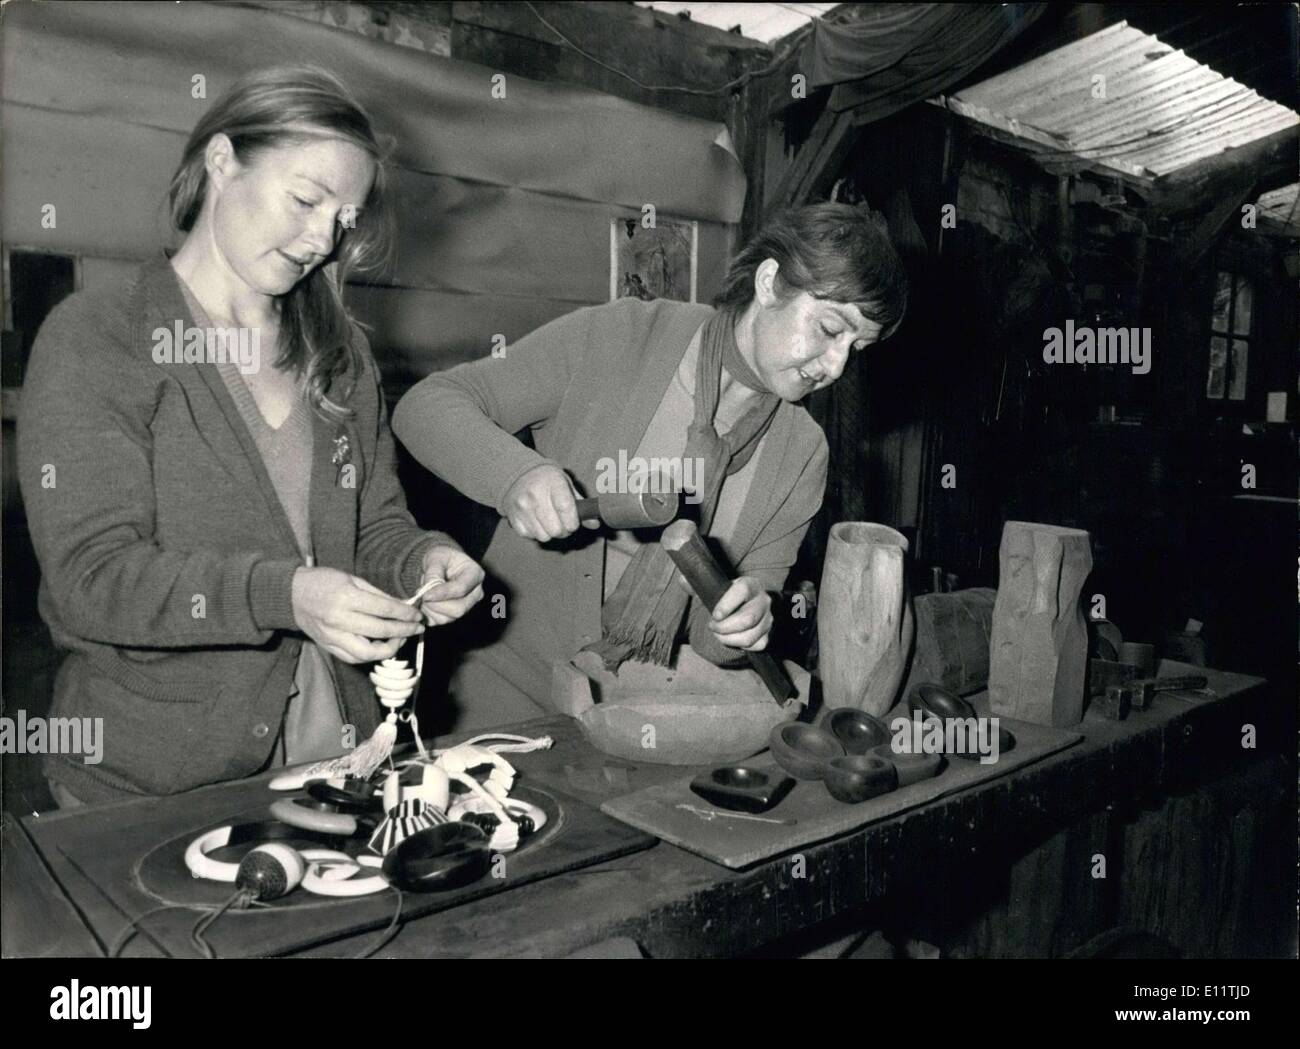 Nov. 23, 1979 - Odile Noll learned how to sculpt wood from her father Alexandre Noll. She does the work for a living in her workshop in the Paris suburbs. She makes decorative and useful objects. Her daughter Catherine makes wooden jewelry. And so the tradition continues Stock Photo